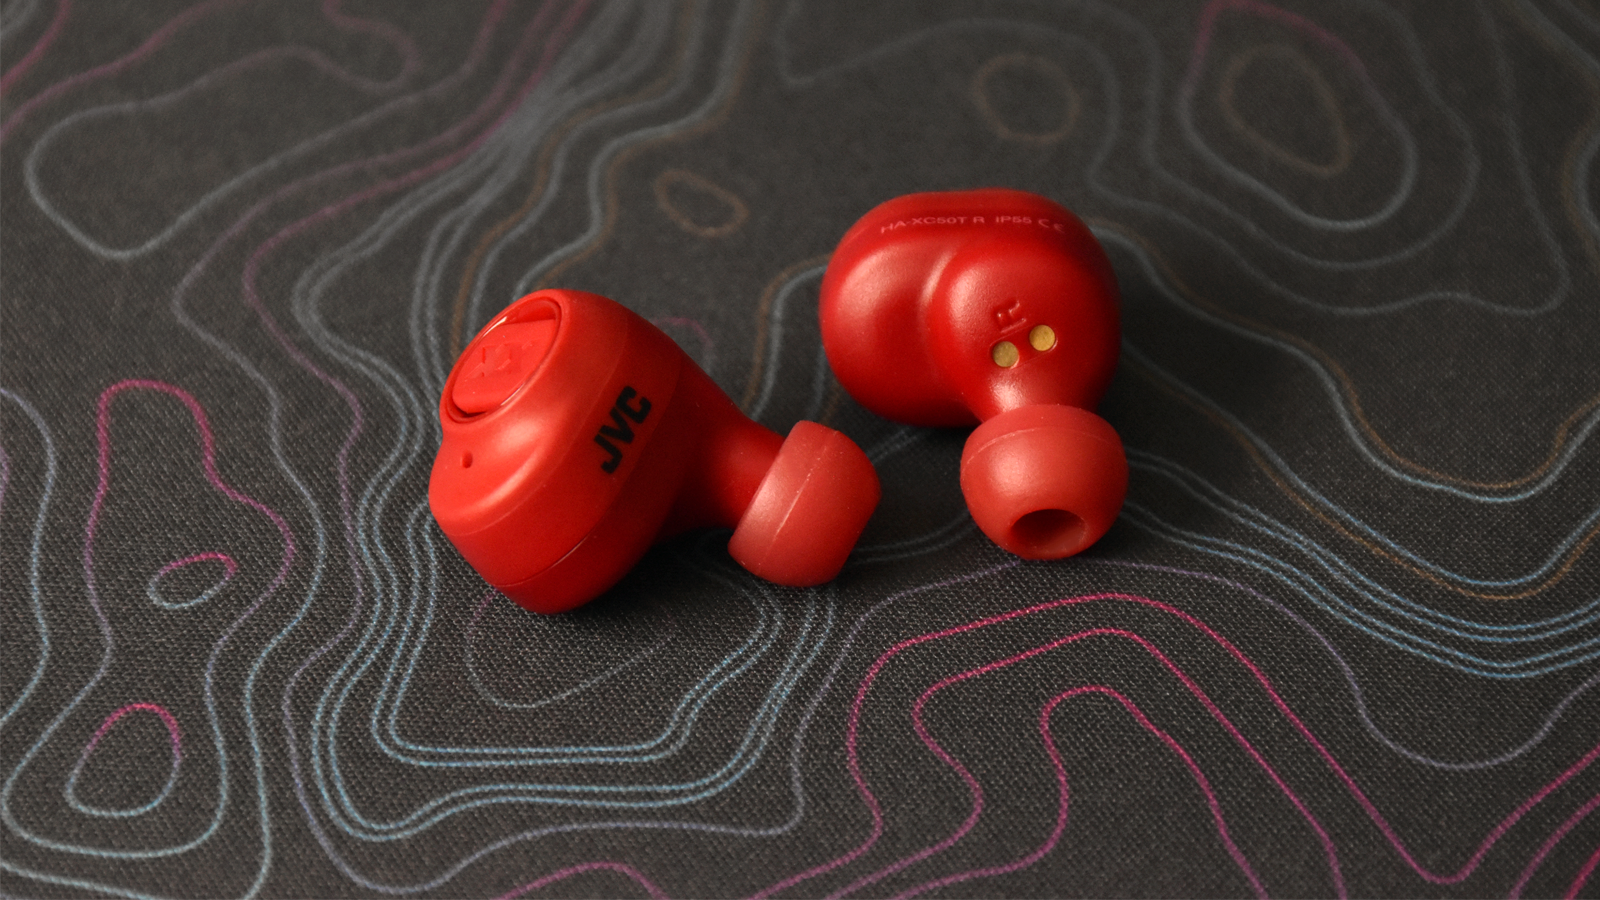 View of just the earbuds against a decorative background